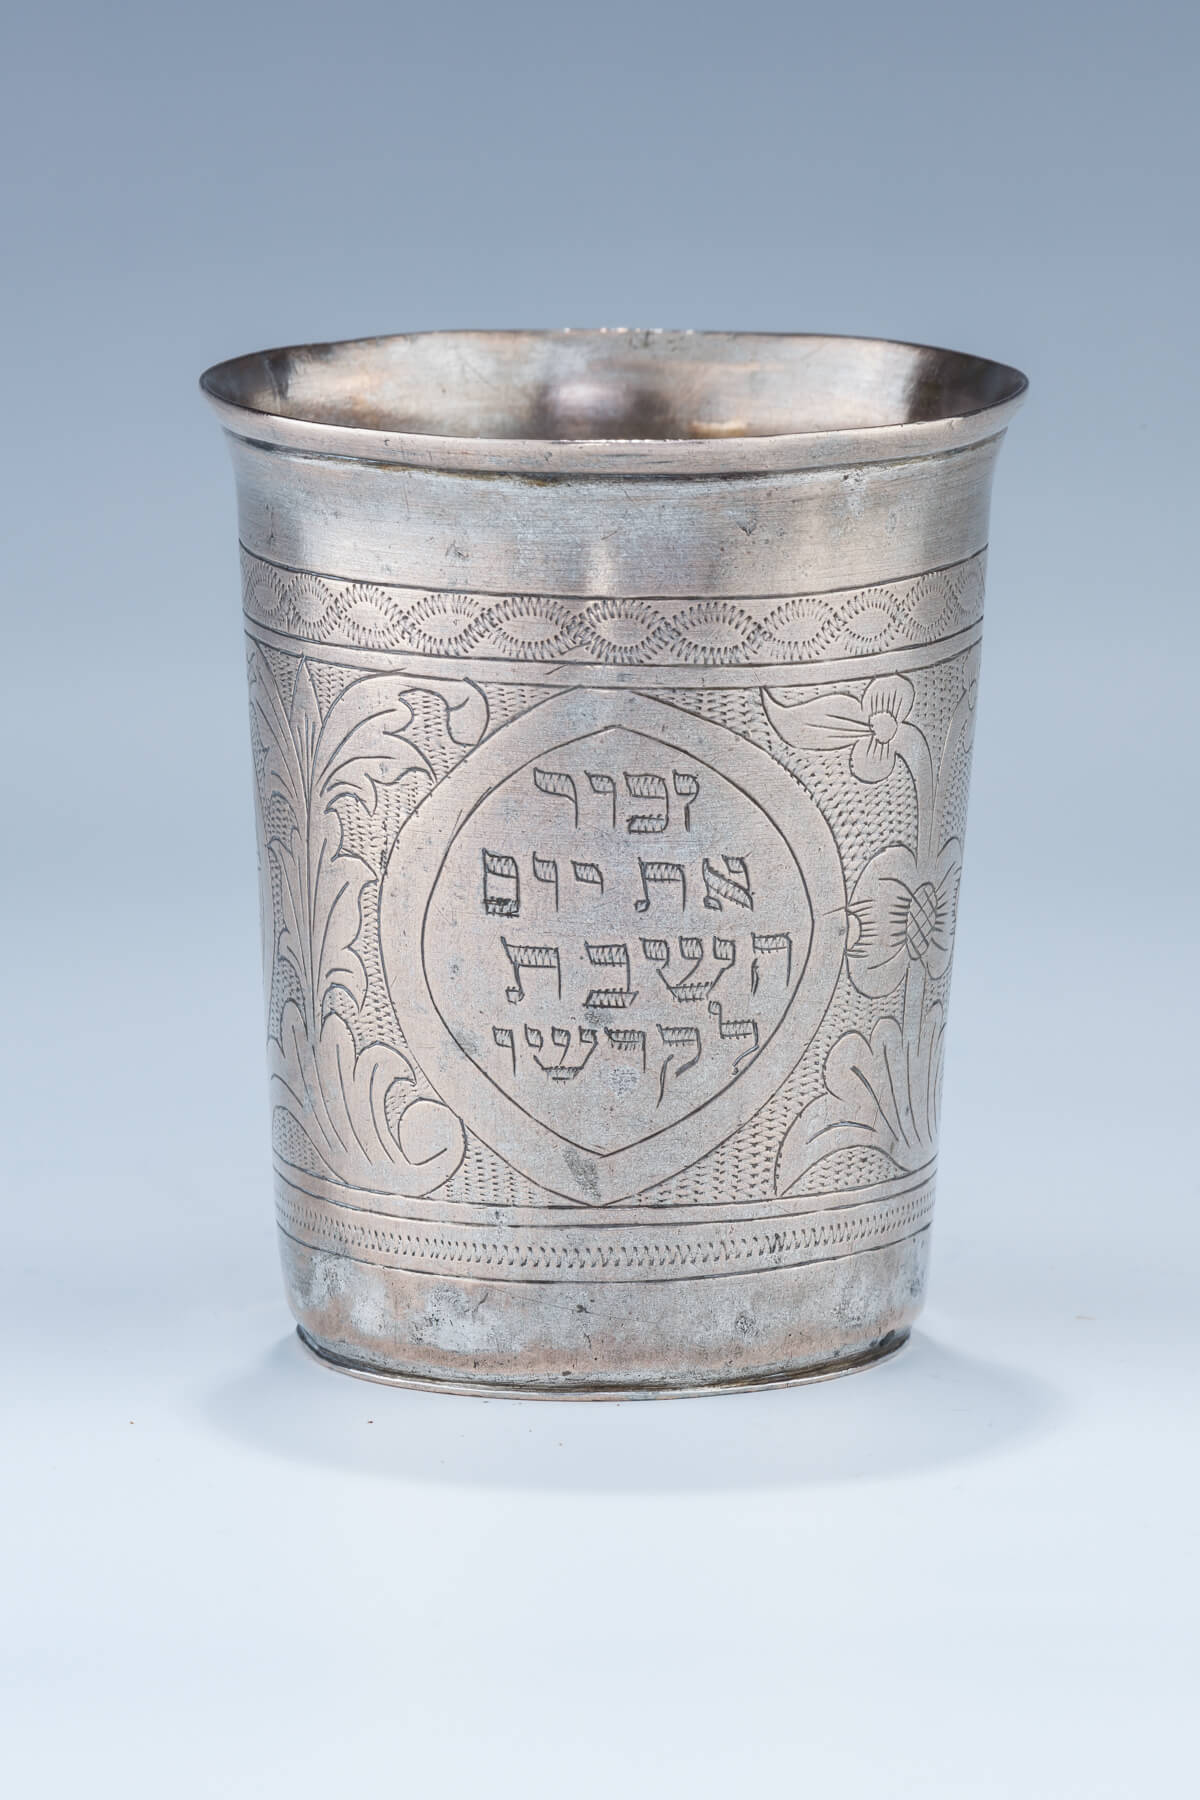 51. A Large Silver Kiddush Cup